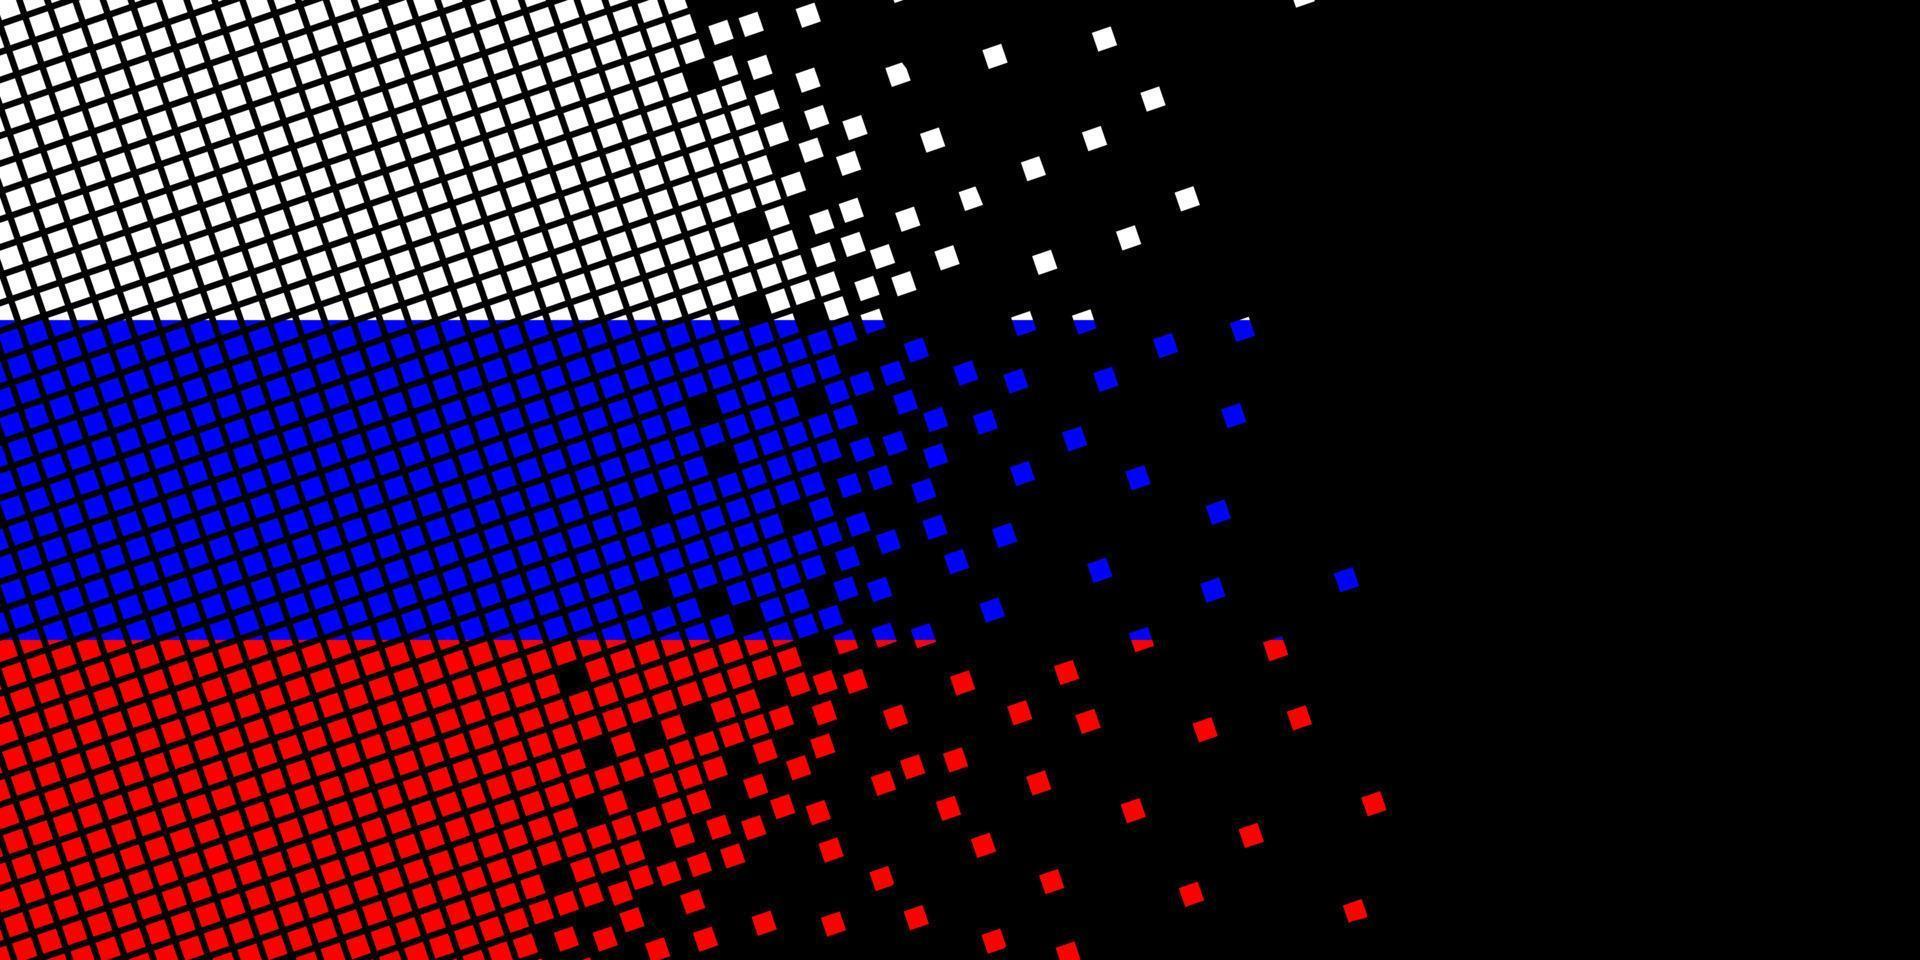 Pixel art with Russia flag. Pixel Dots grow by concentrating within the flag. The dots inside the Russia flag are pixel art representing unity and independence. Flag on black background. vector